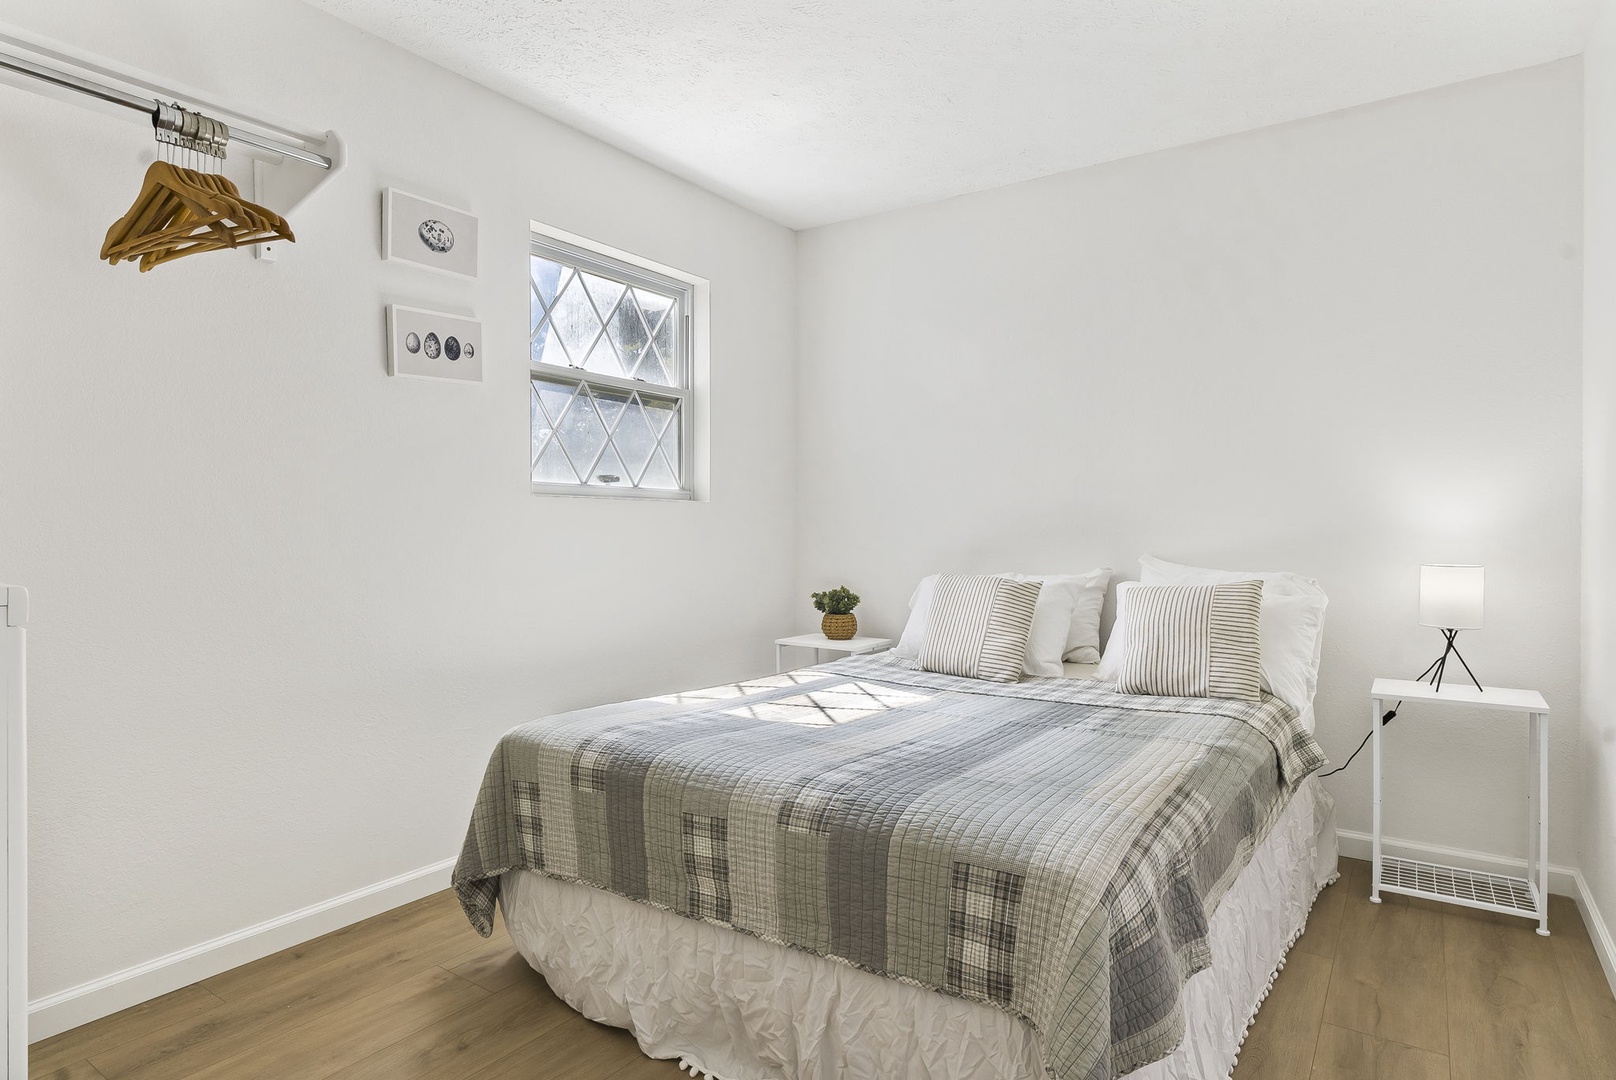 Unit 43: The 1st of 3 bedrooms on the second floor offers a queen bed